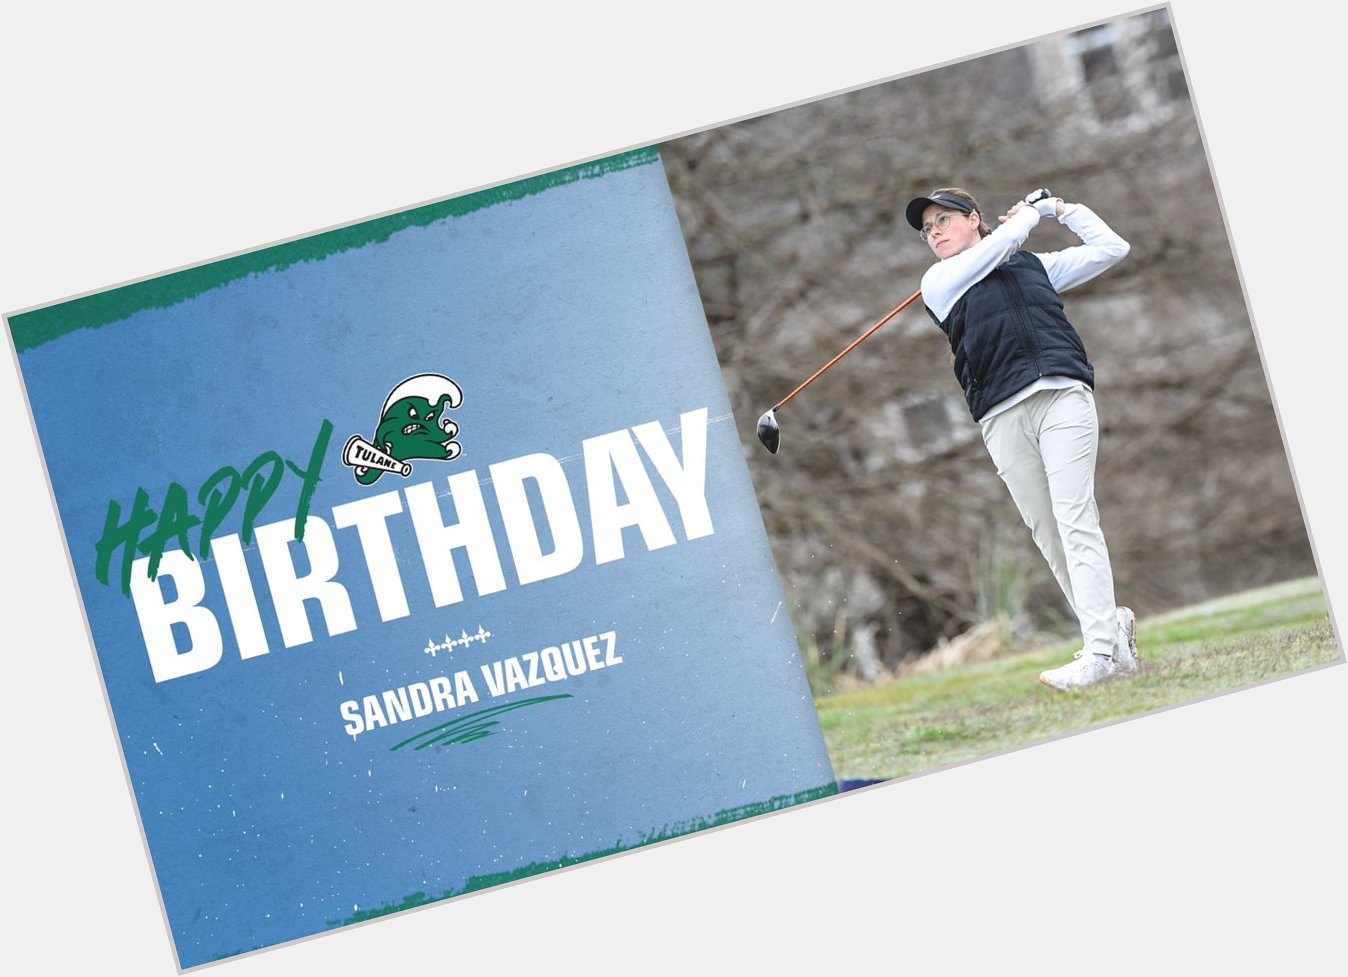 Happy birthday, Sandra! Here s to one more year and one less stroke on the back nine!    